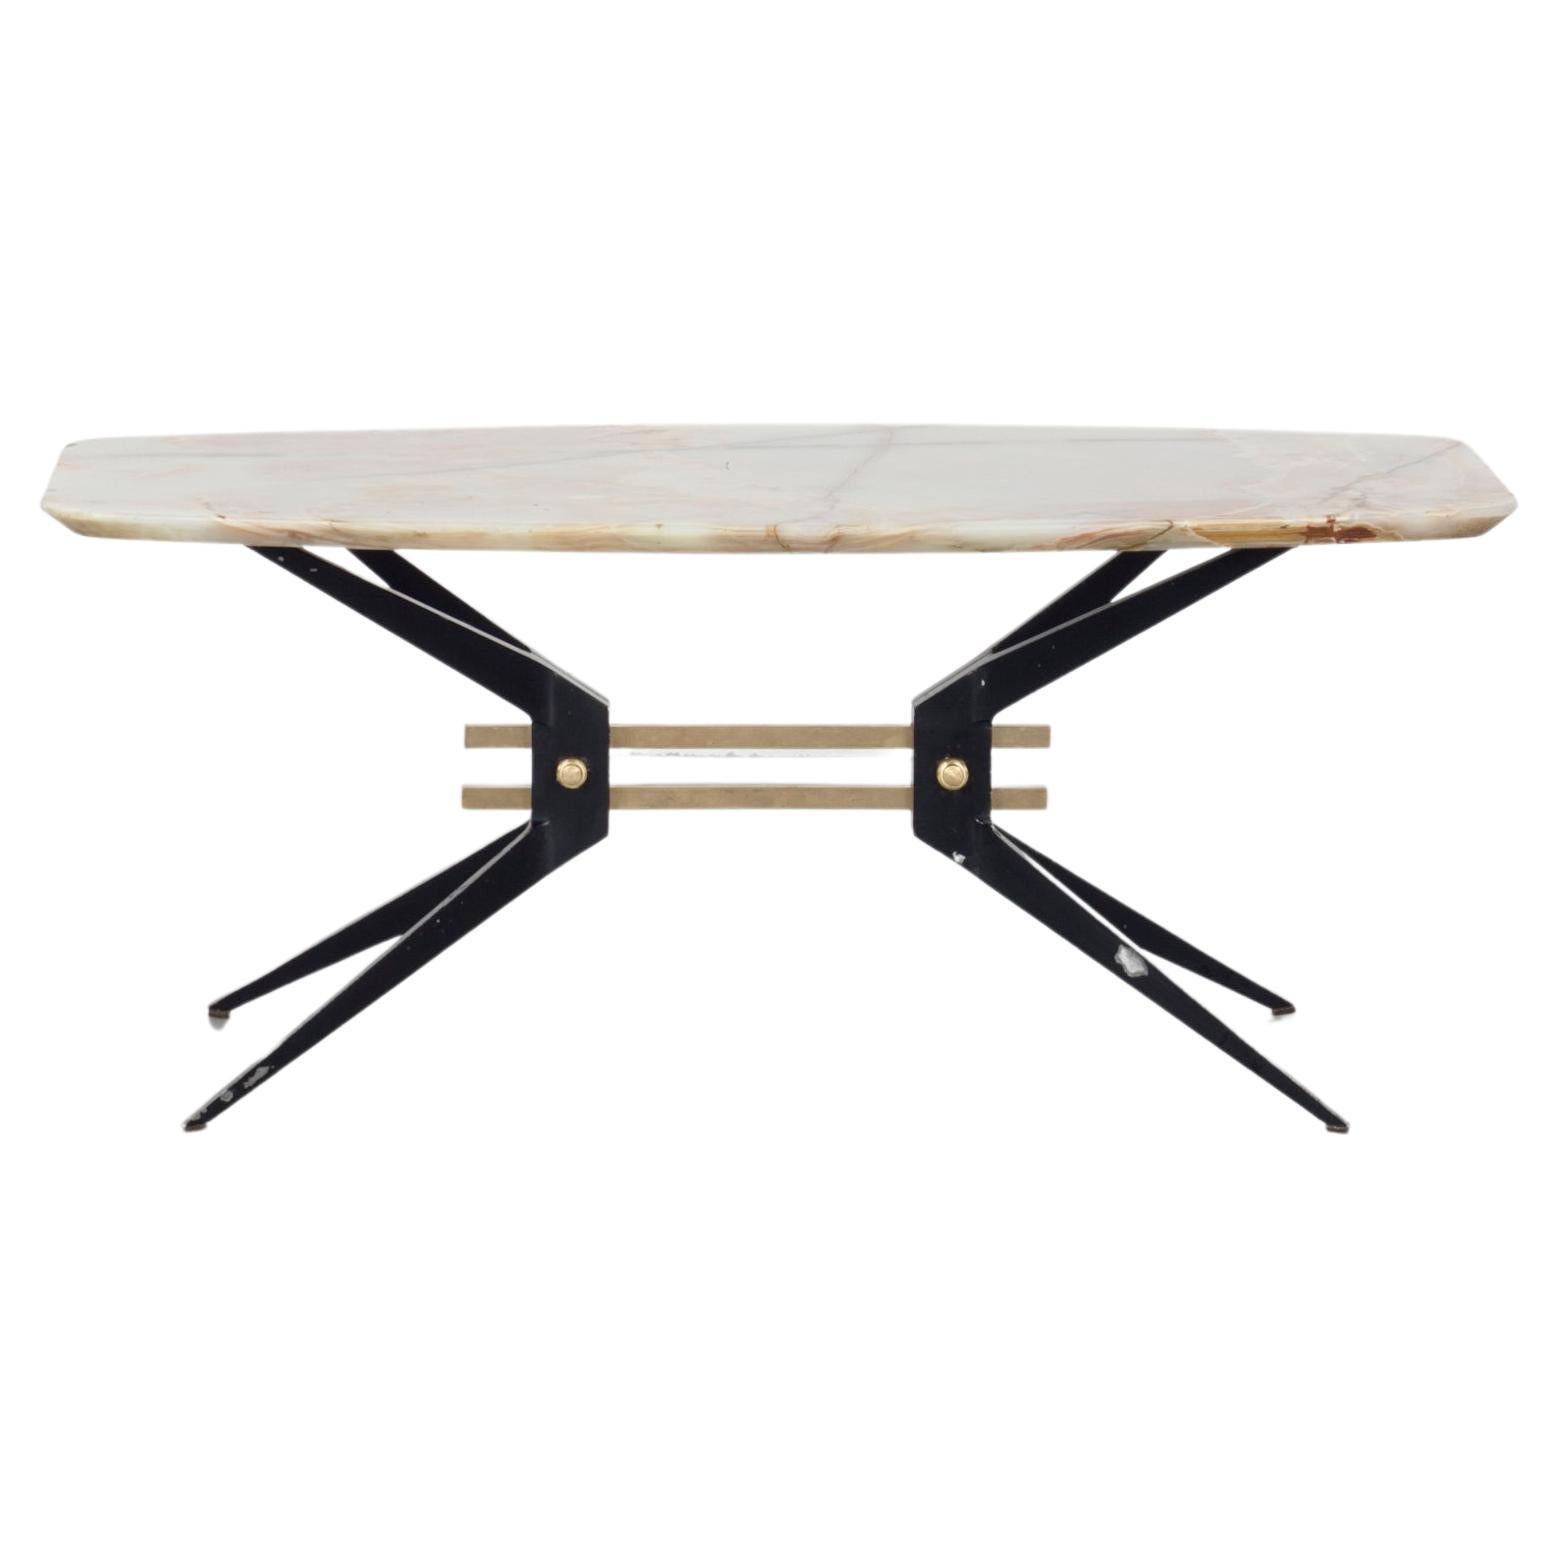 Italian Midcentury Side Table with Onyx Top, 1960